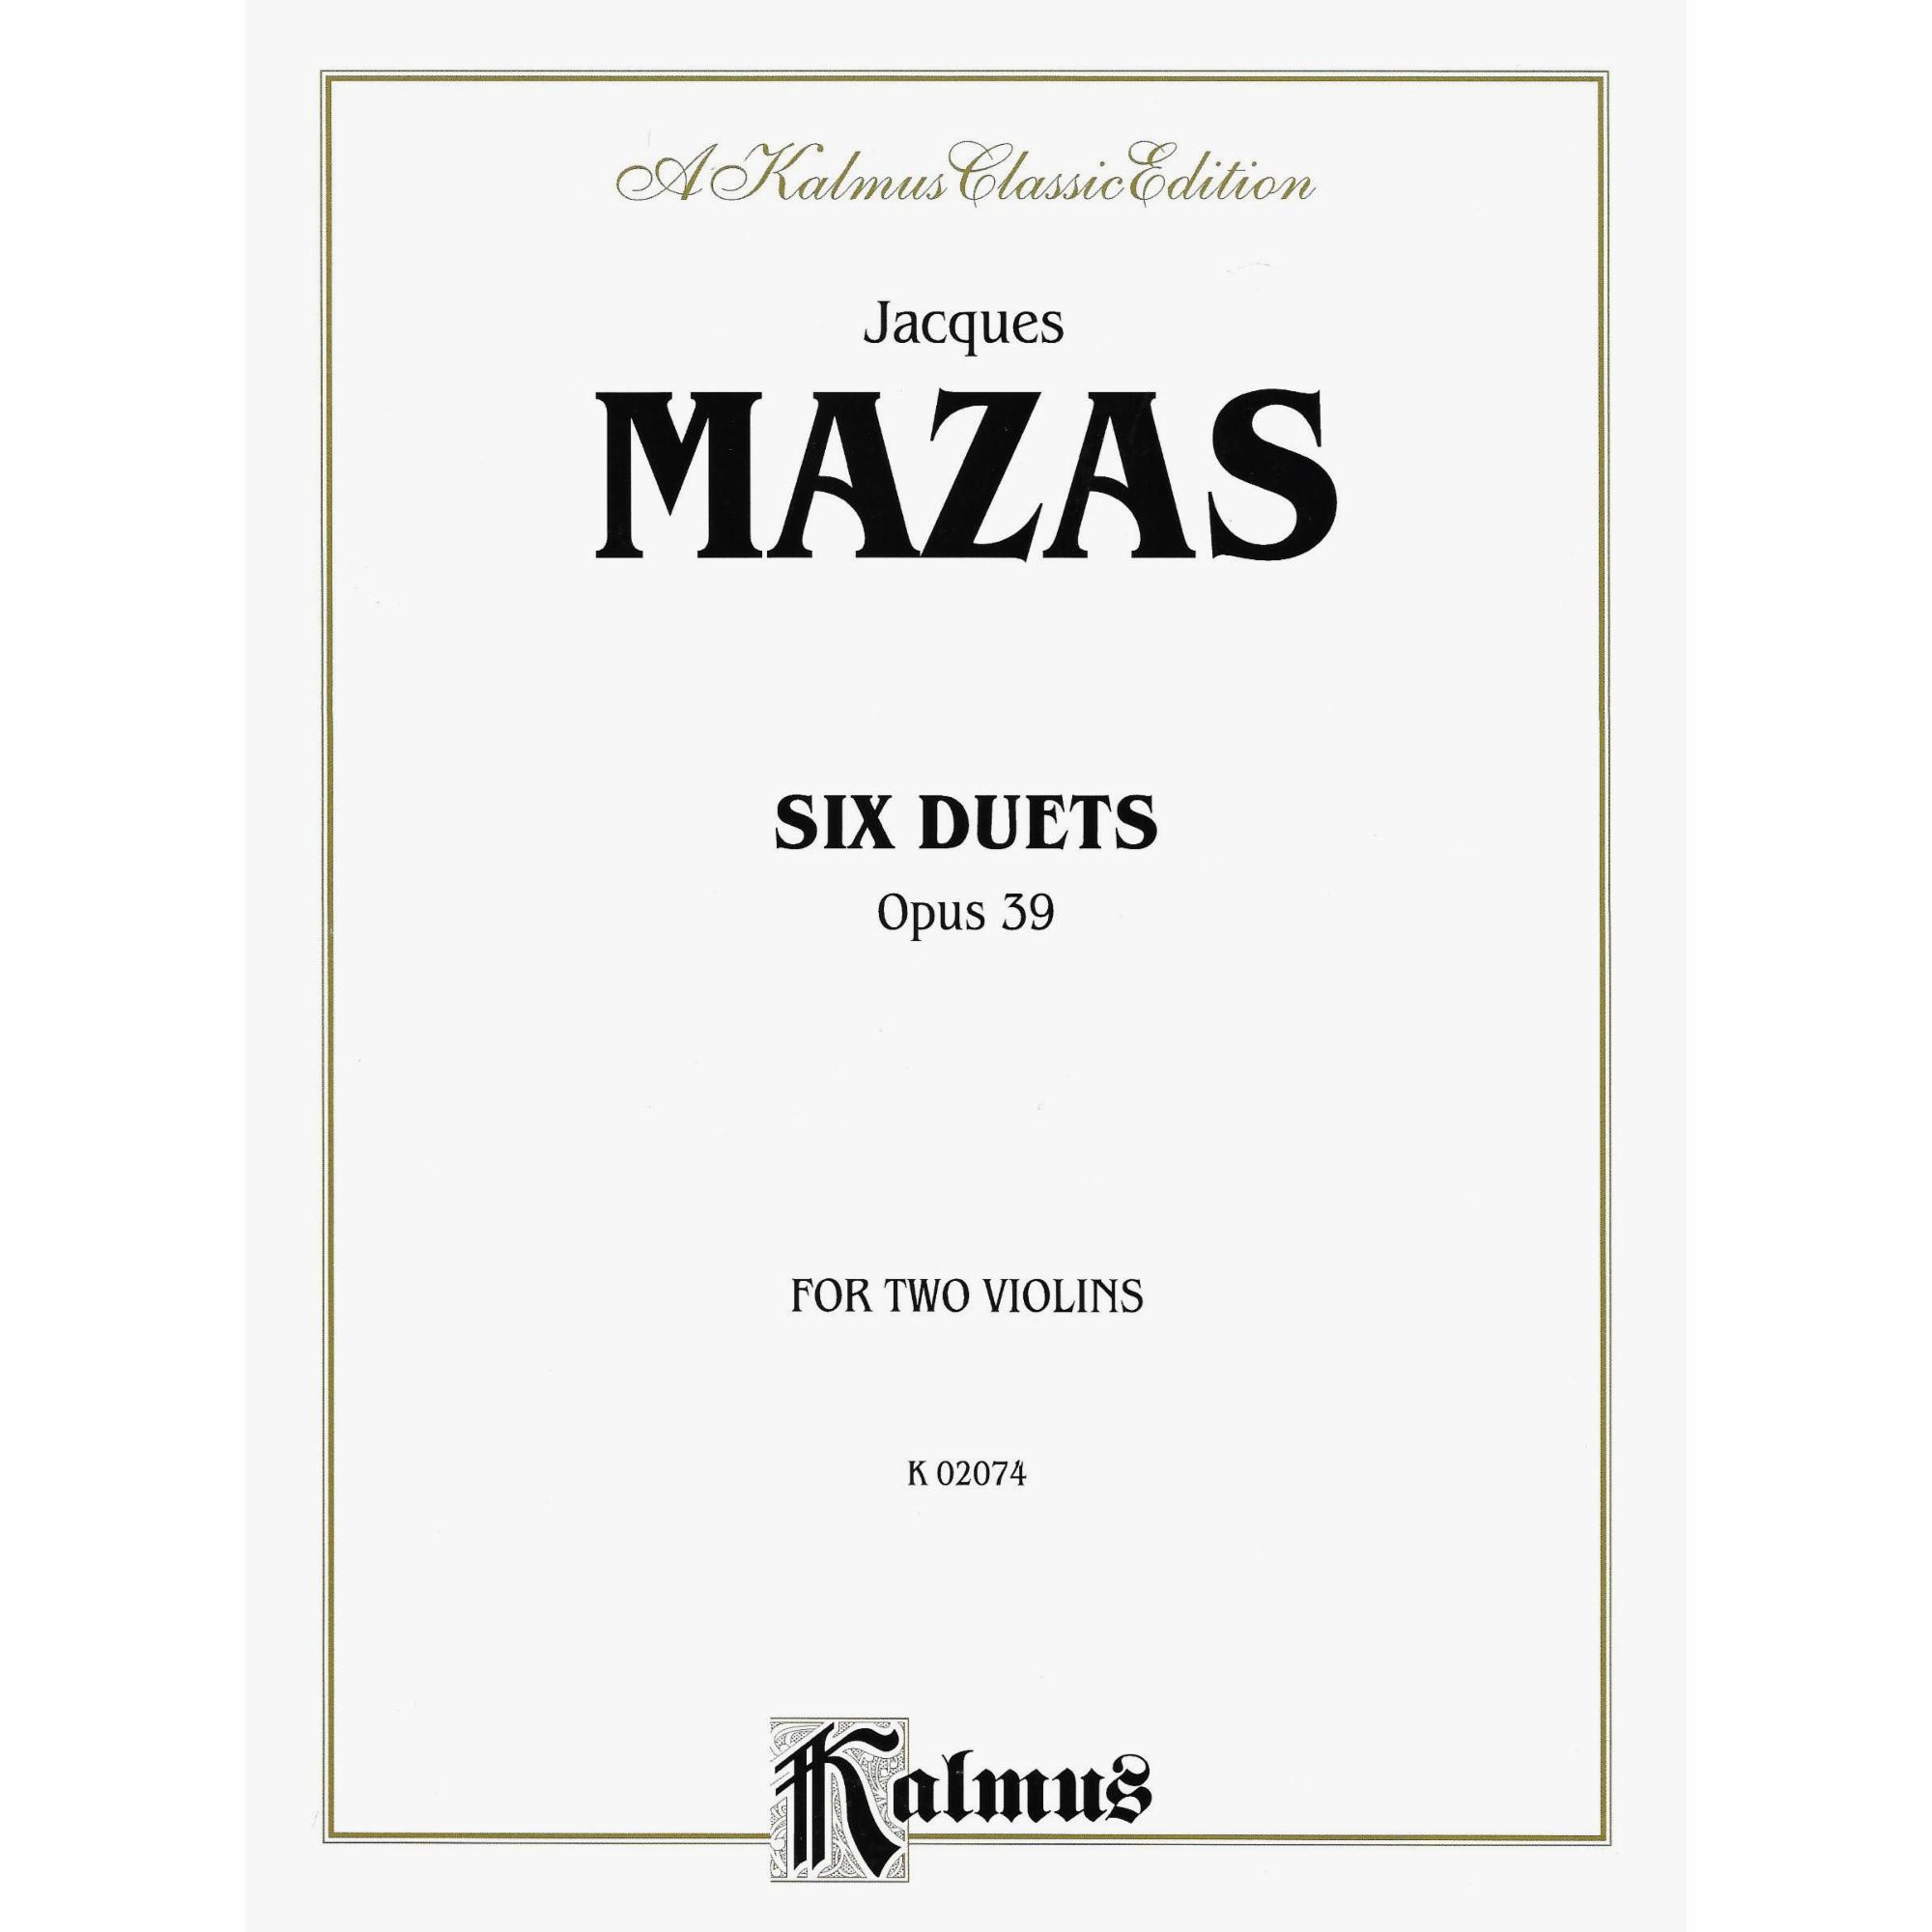 Mazas -- Six Duets, Op. 39 for Two Violins